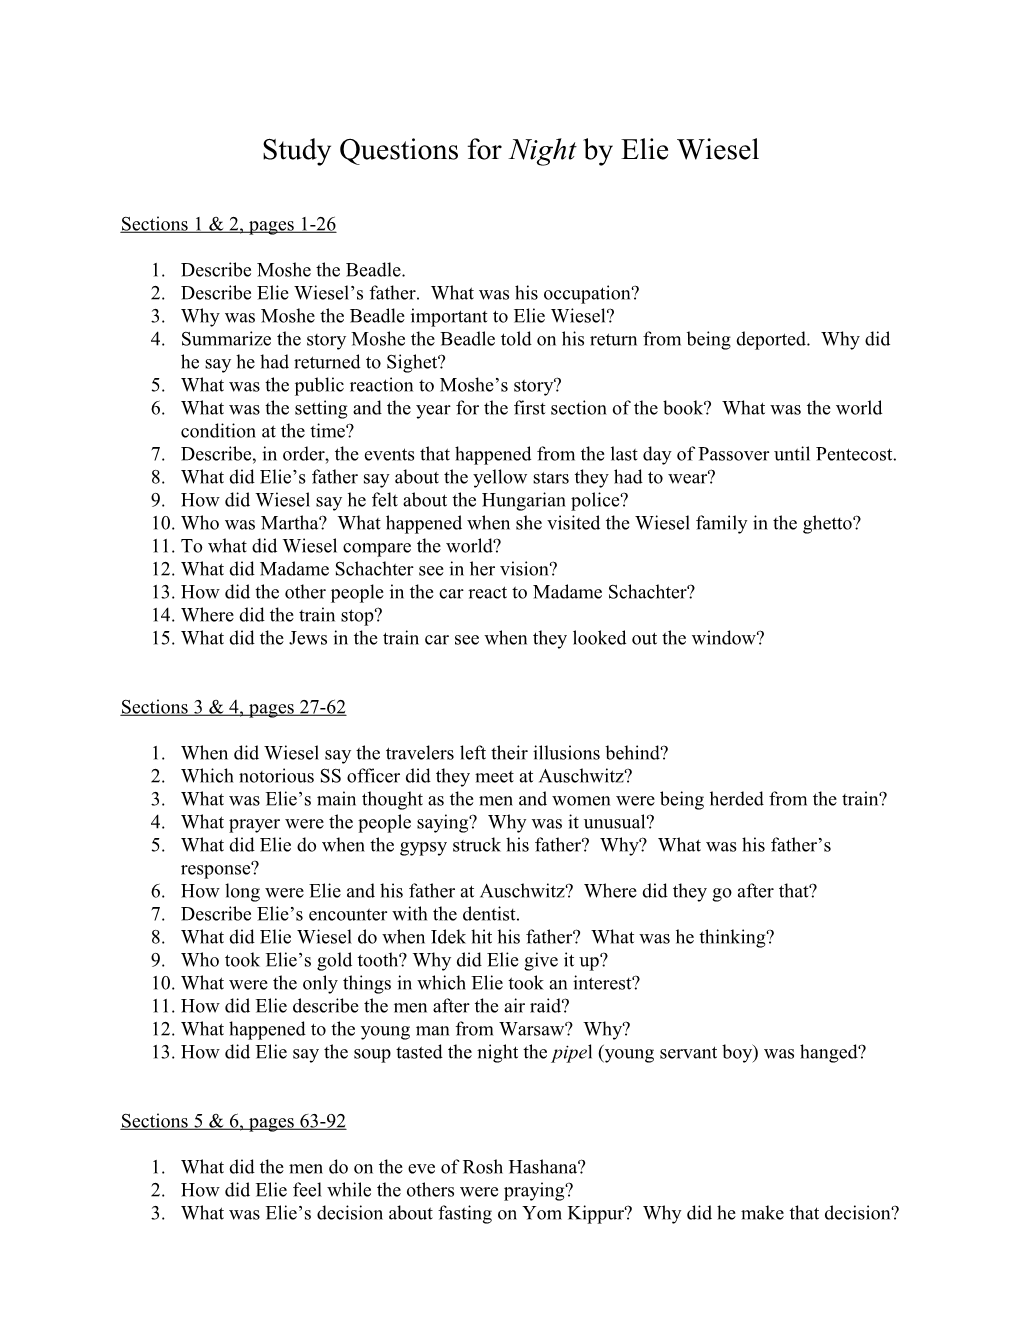 Study Questions for Night by Elie Wiesel